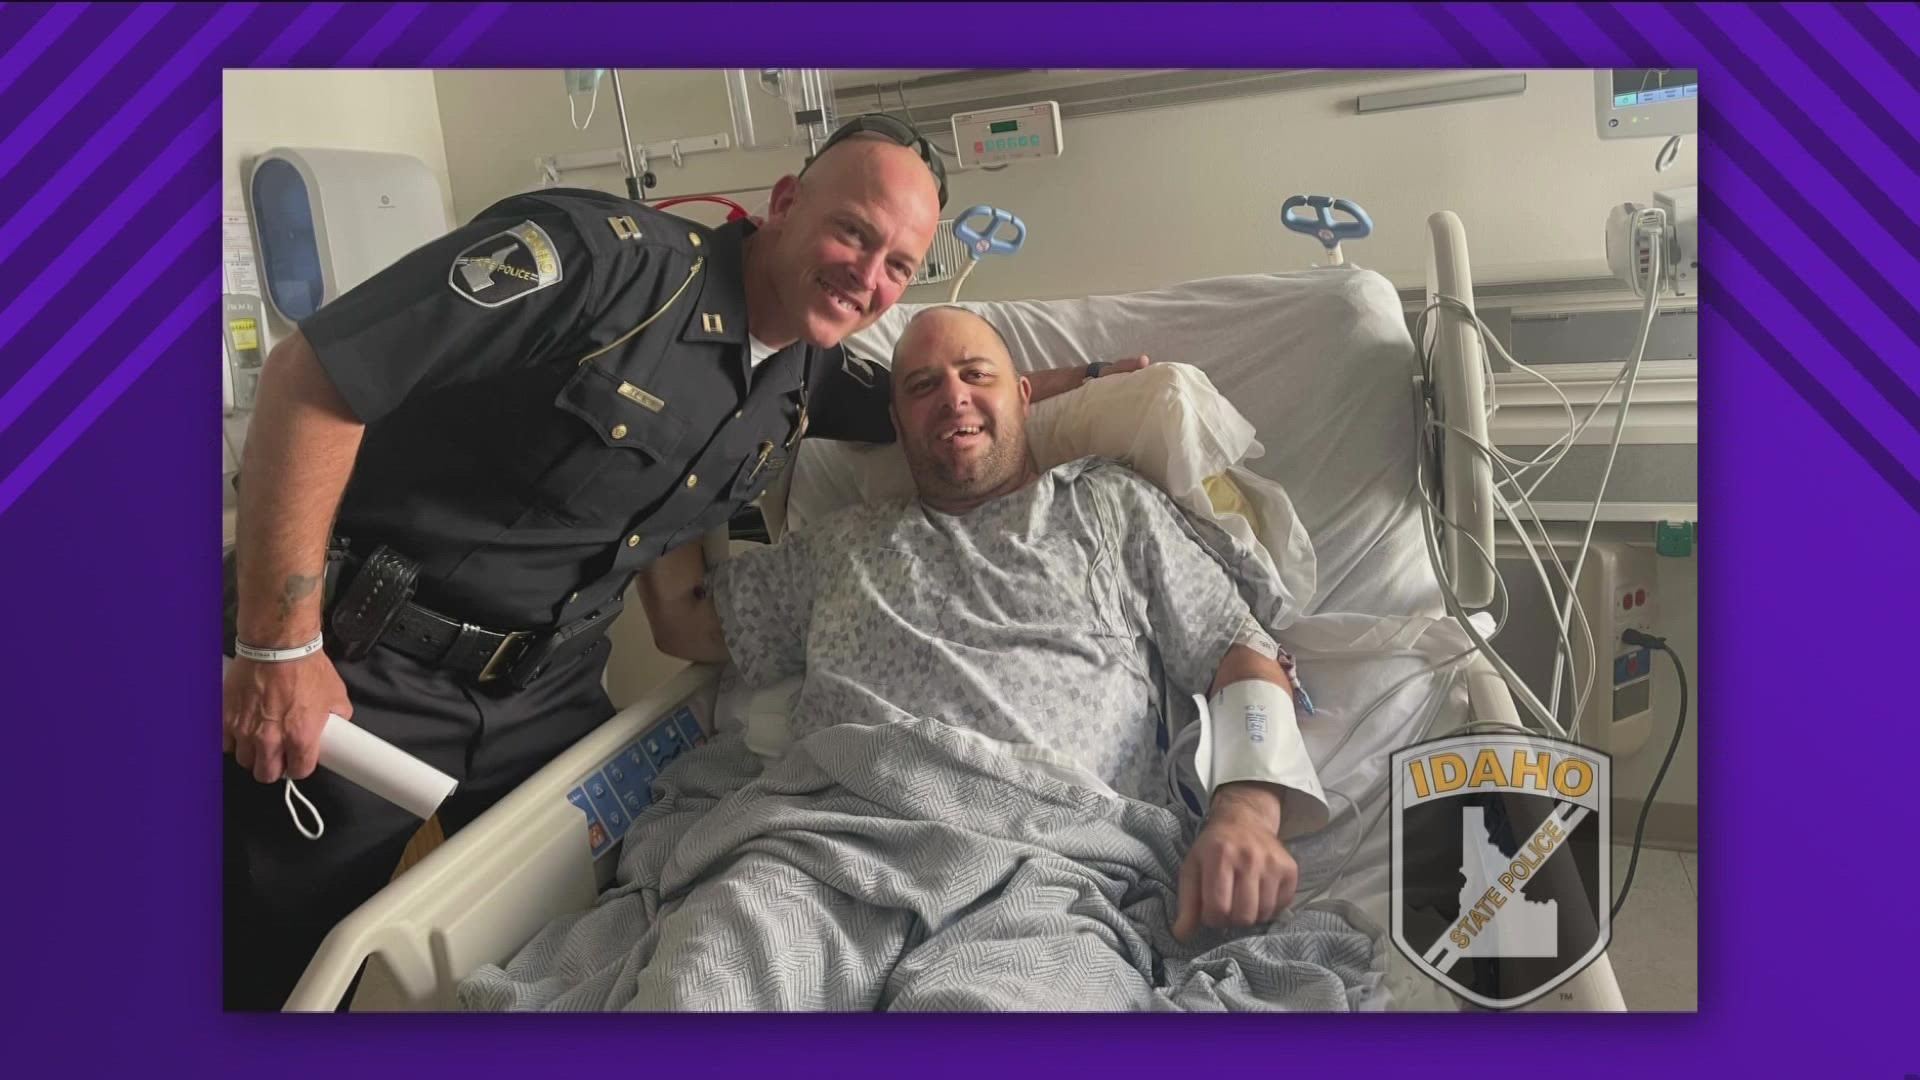 "When people in towns across our state stop to ask our troopers how Sgt Wendler is doing, it reconfirms how fortunate we are to serve the people of Idaho."